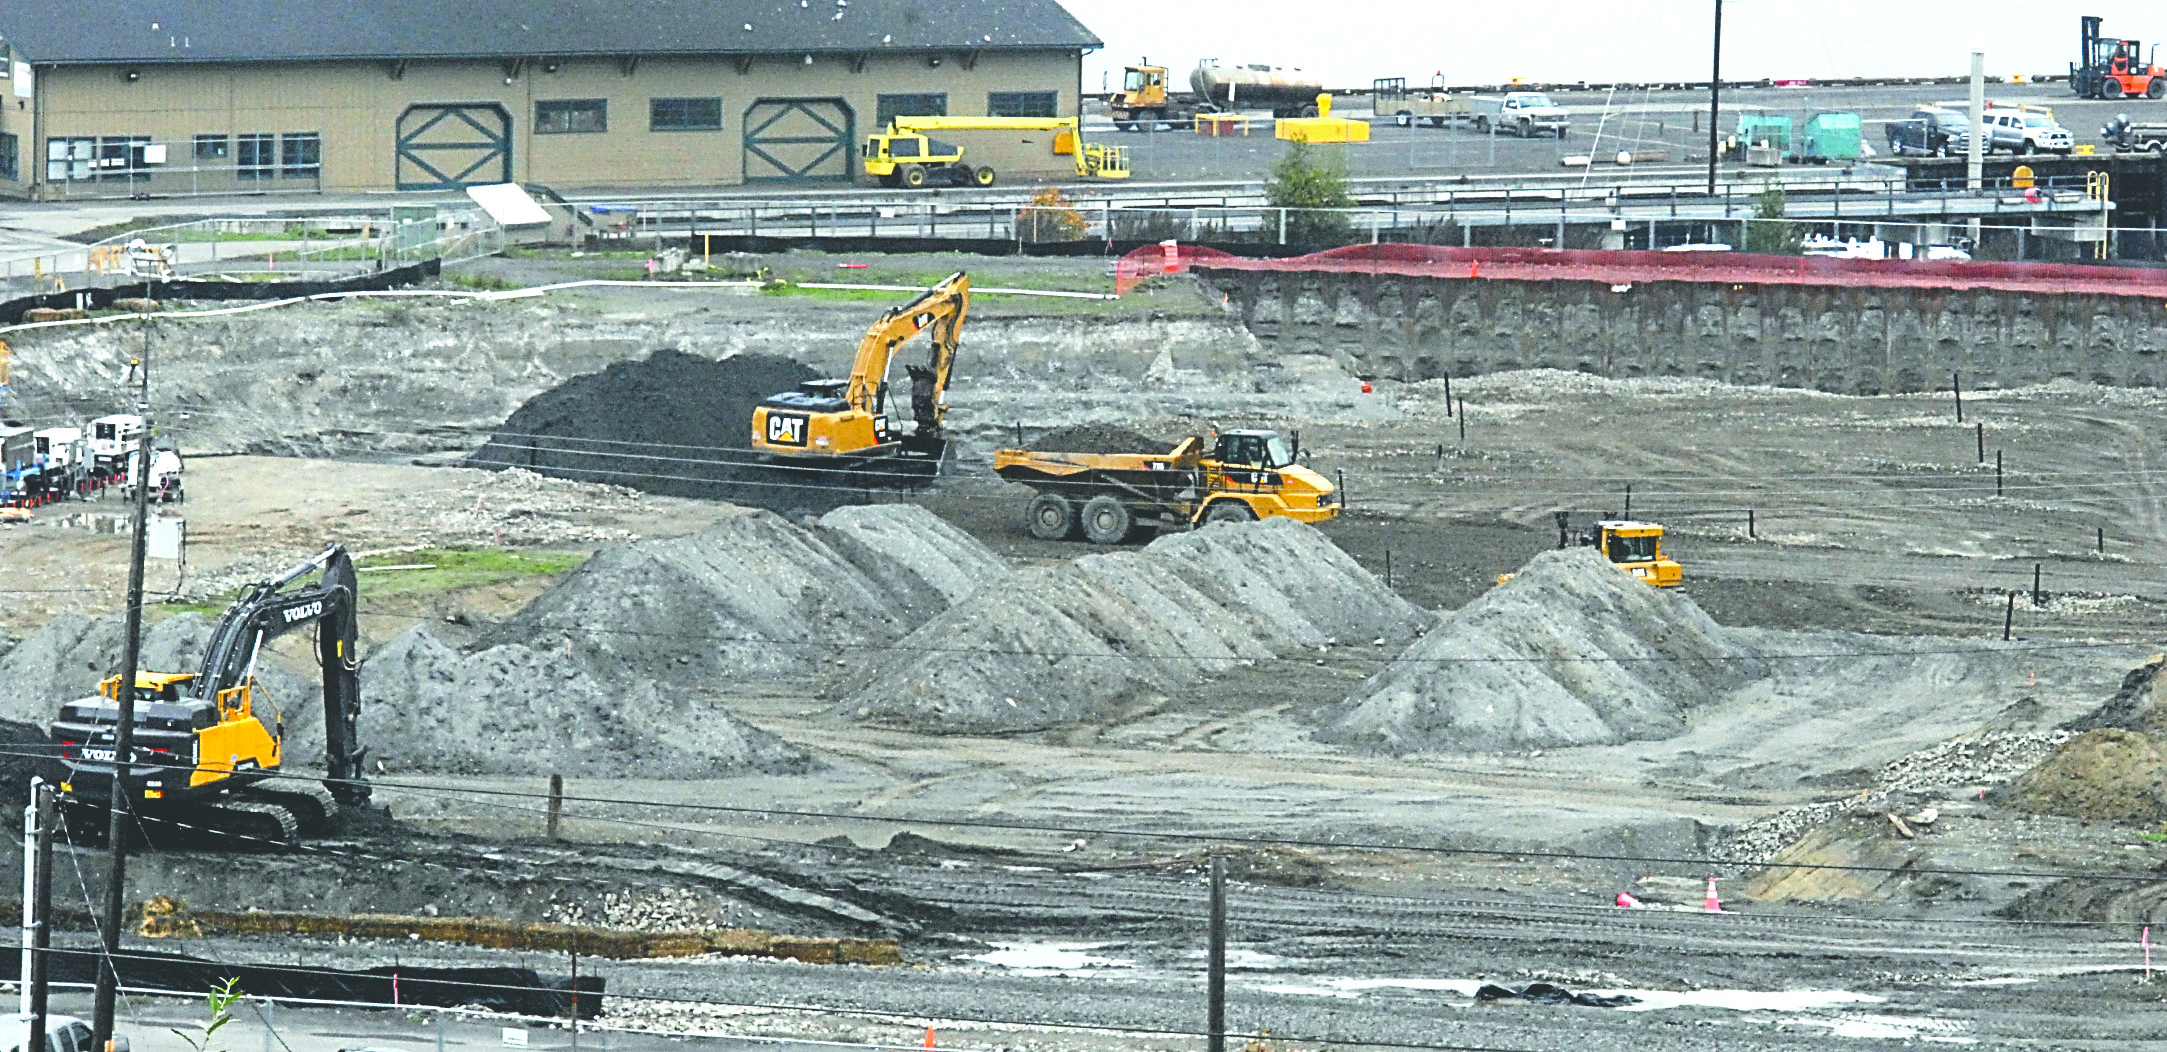 Excavators and bulldozers remove dirt at the site of the former KPly mill in Port Angeles in October. Keith Thorpe/Peninsula Daily News